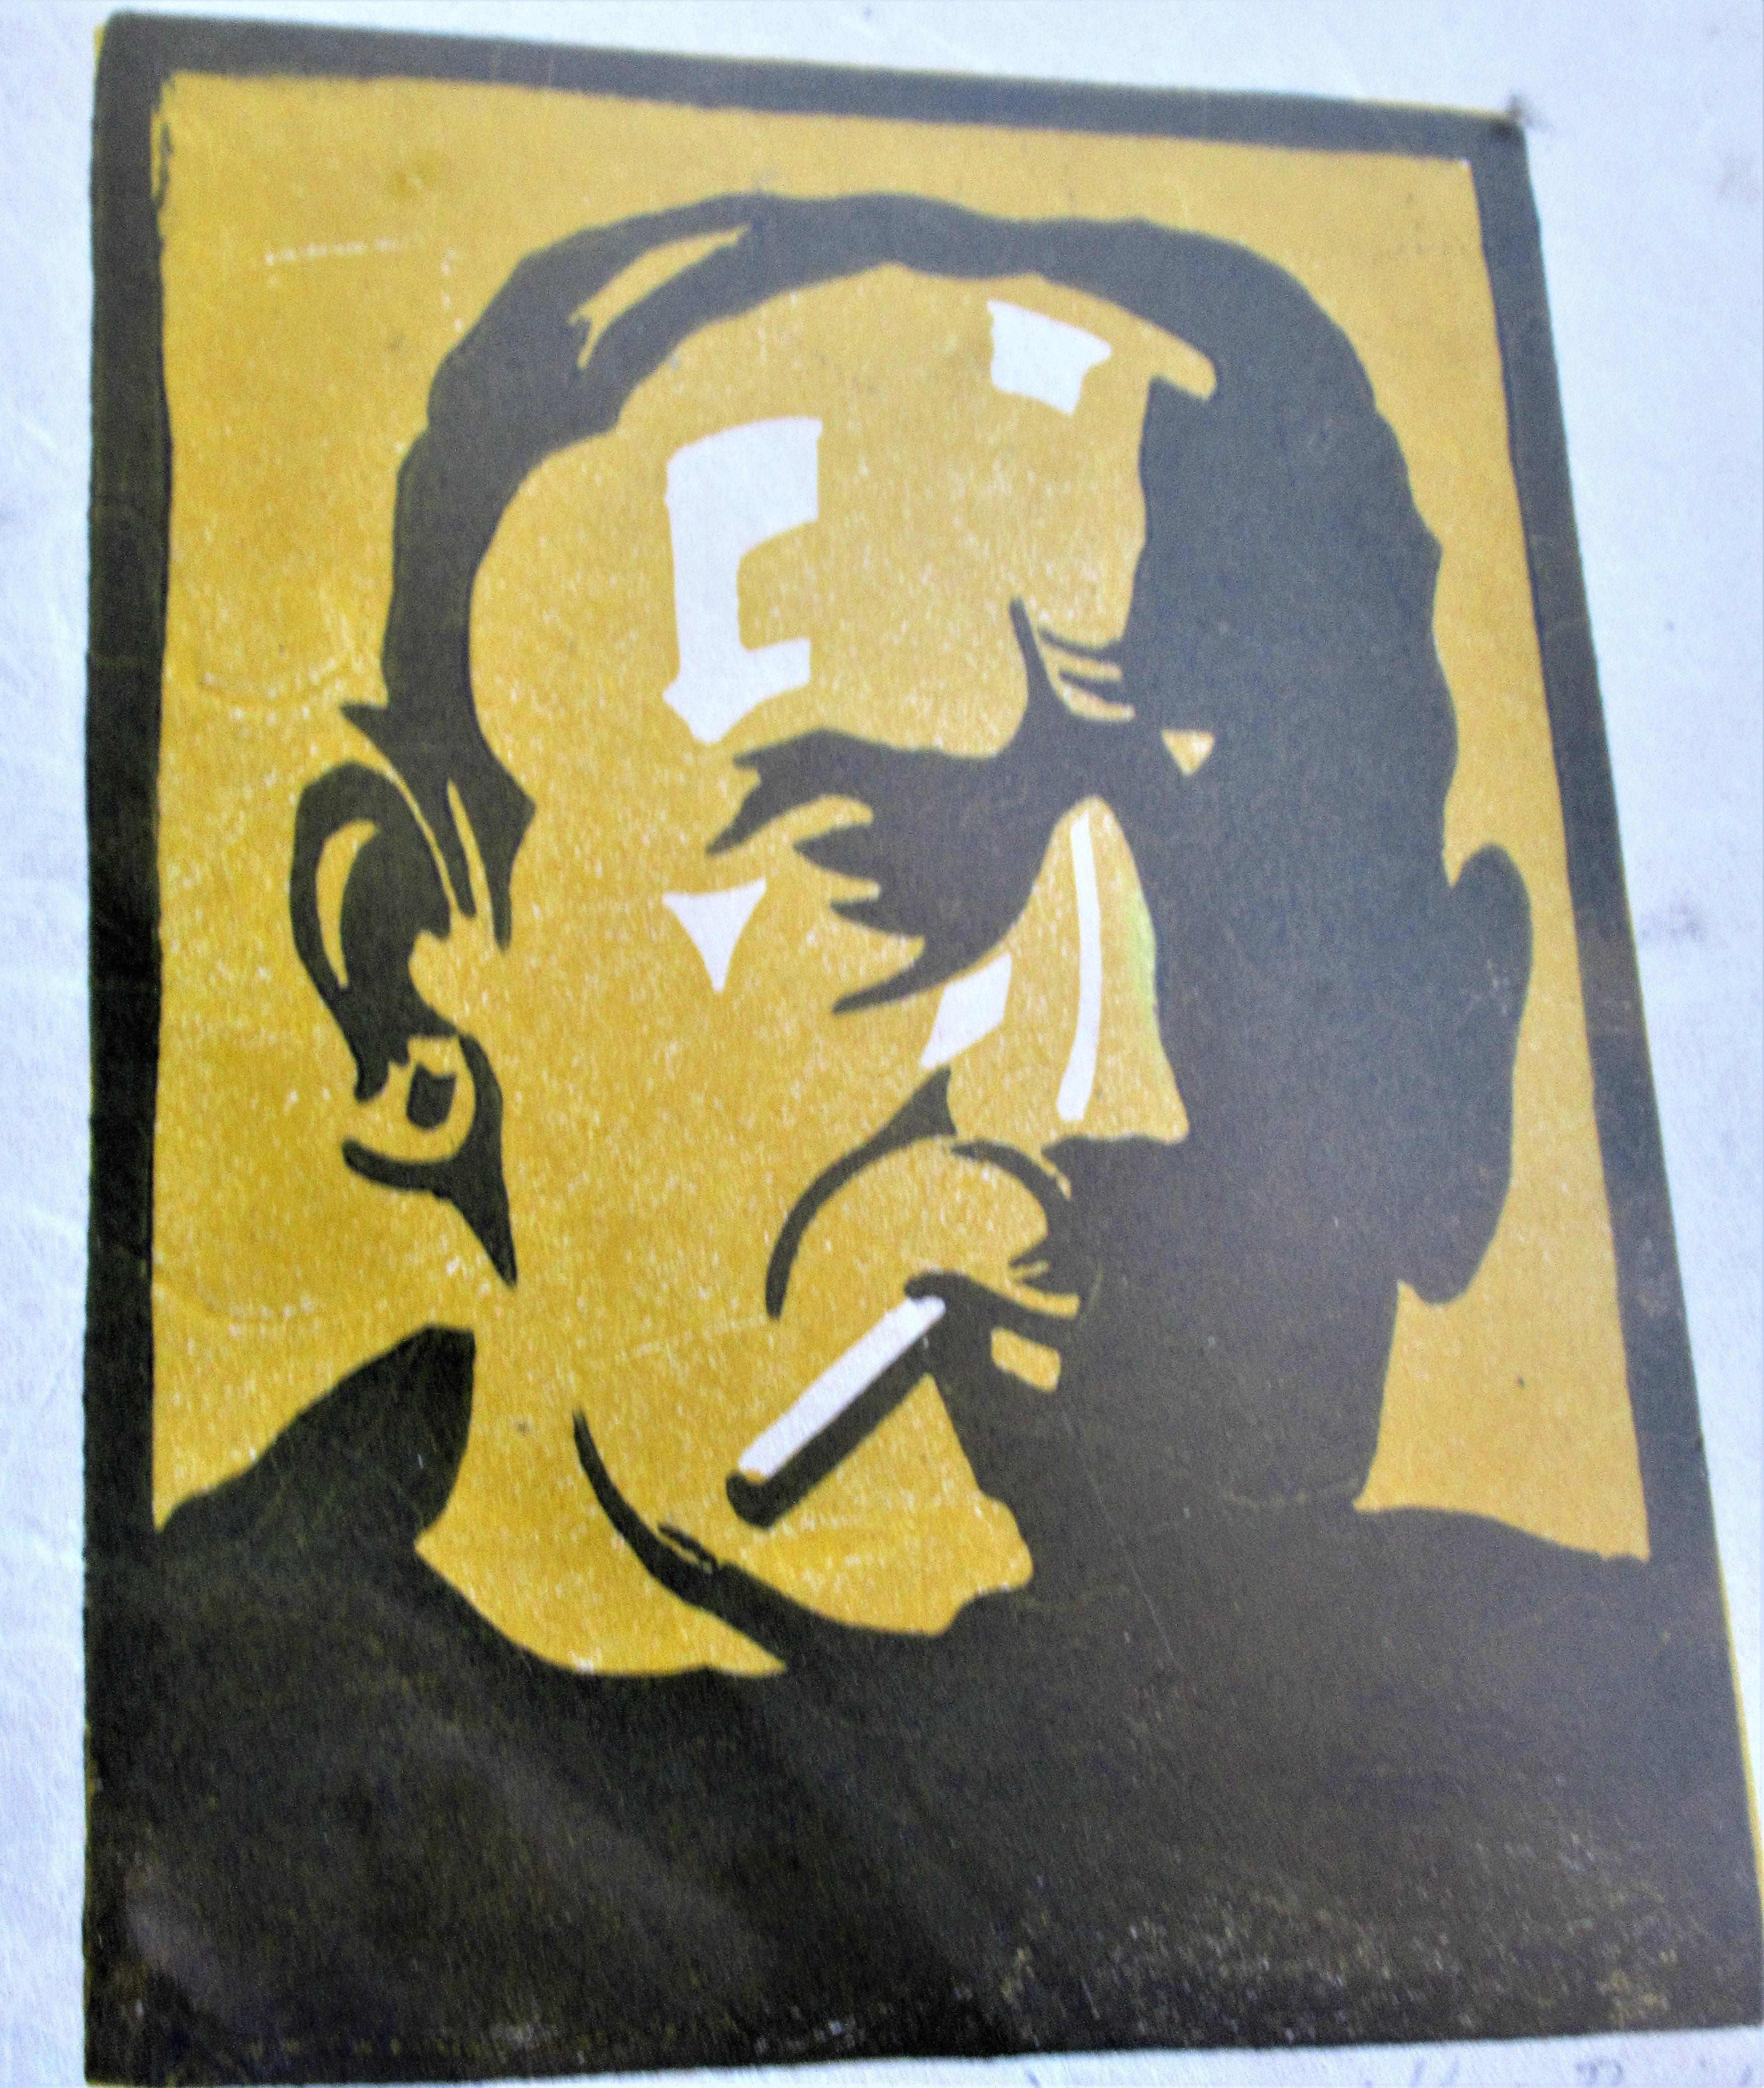 A wood cut print on laid paper of a hard edged looking man smoking a cigarette. Compelling period imagery. Pencil signed and dated  below image - Reichle - 1932 - titled  " Walt "